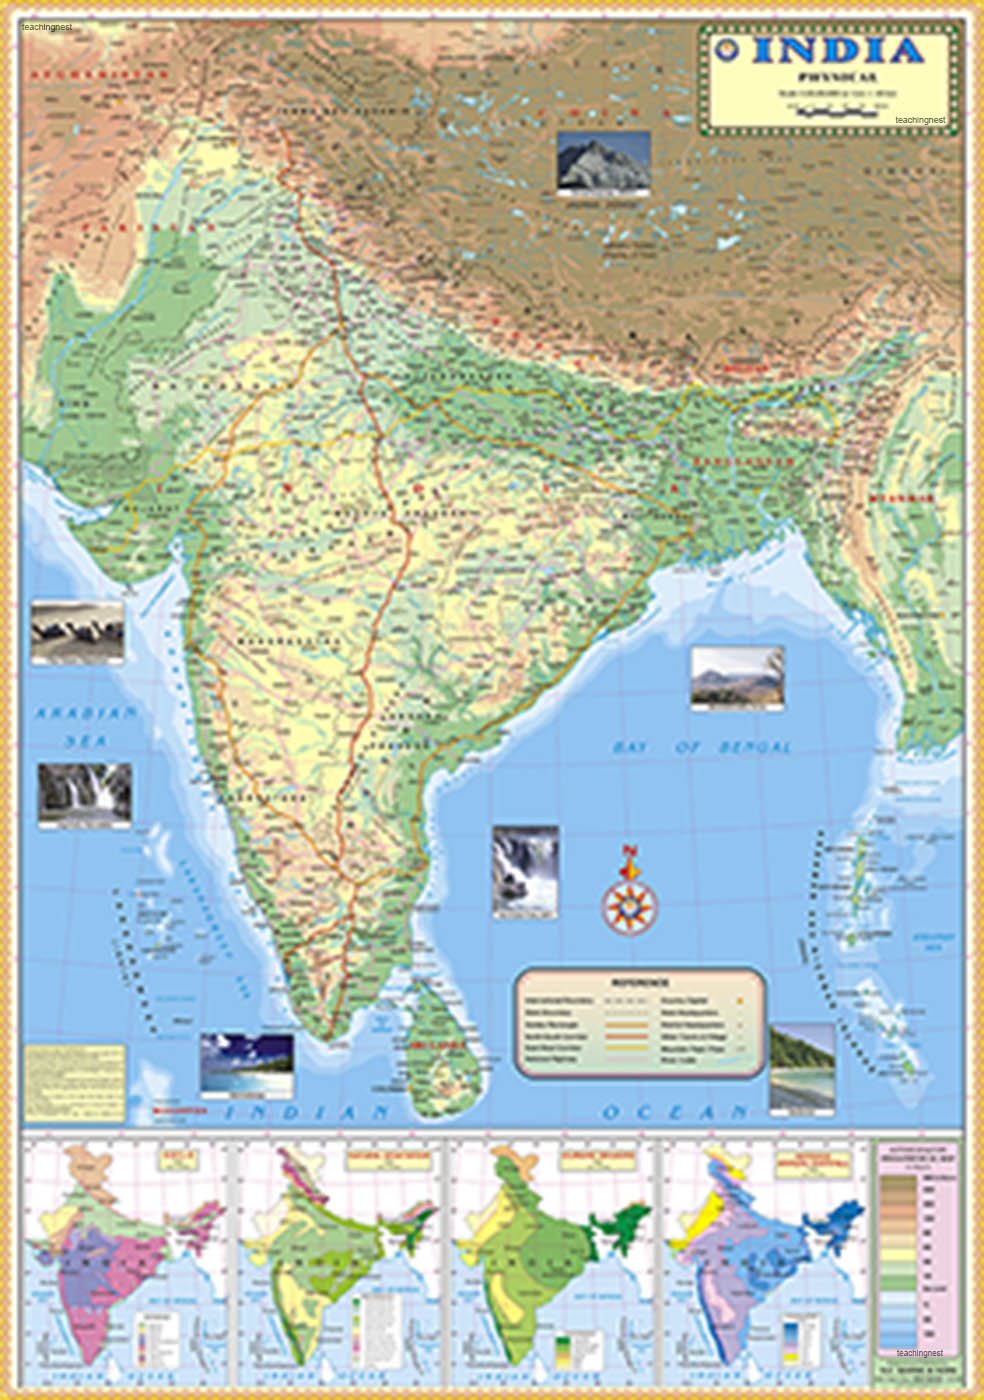 Amazon.in: Buy India Physical Map (70x100cm) Book Online at Low Prices in India. India Physical Map (70x100cm) Reviews & Ratings